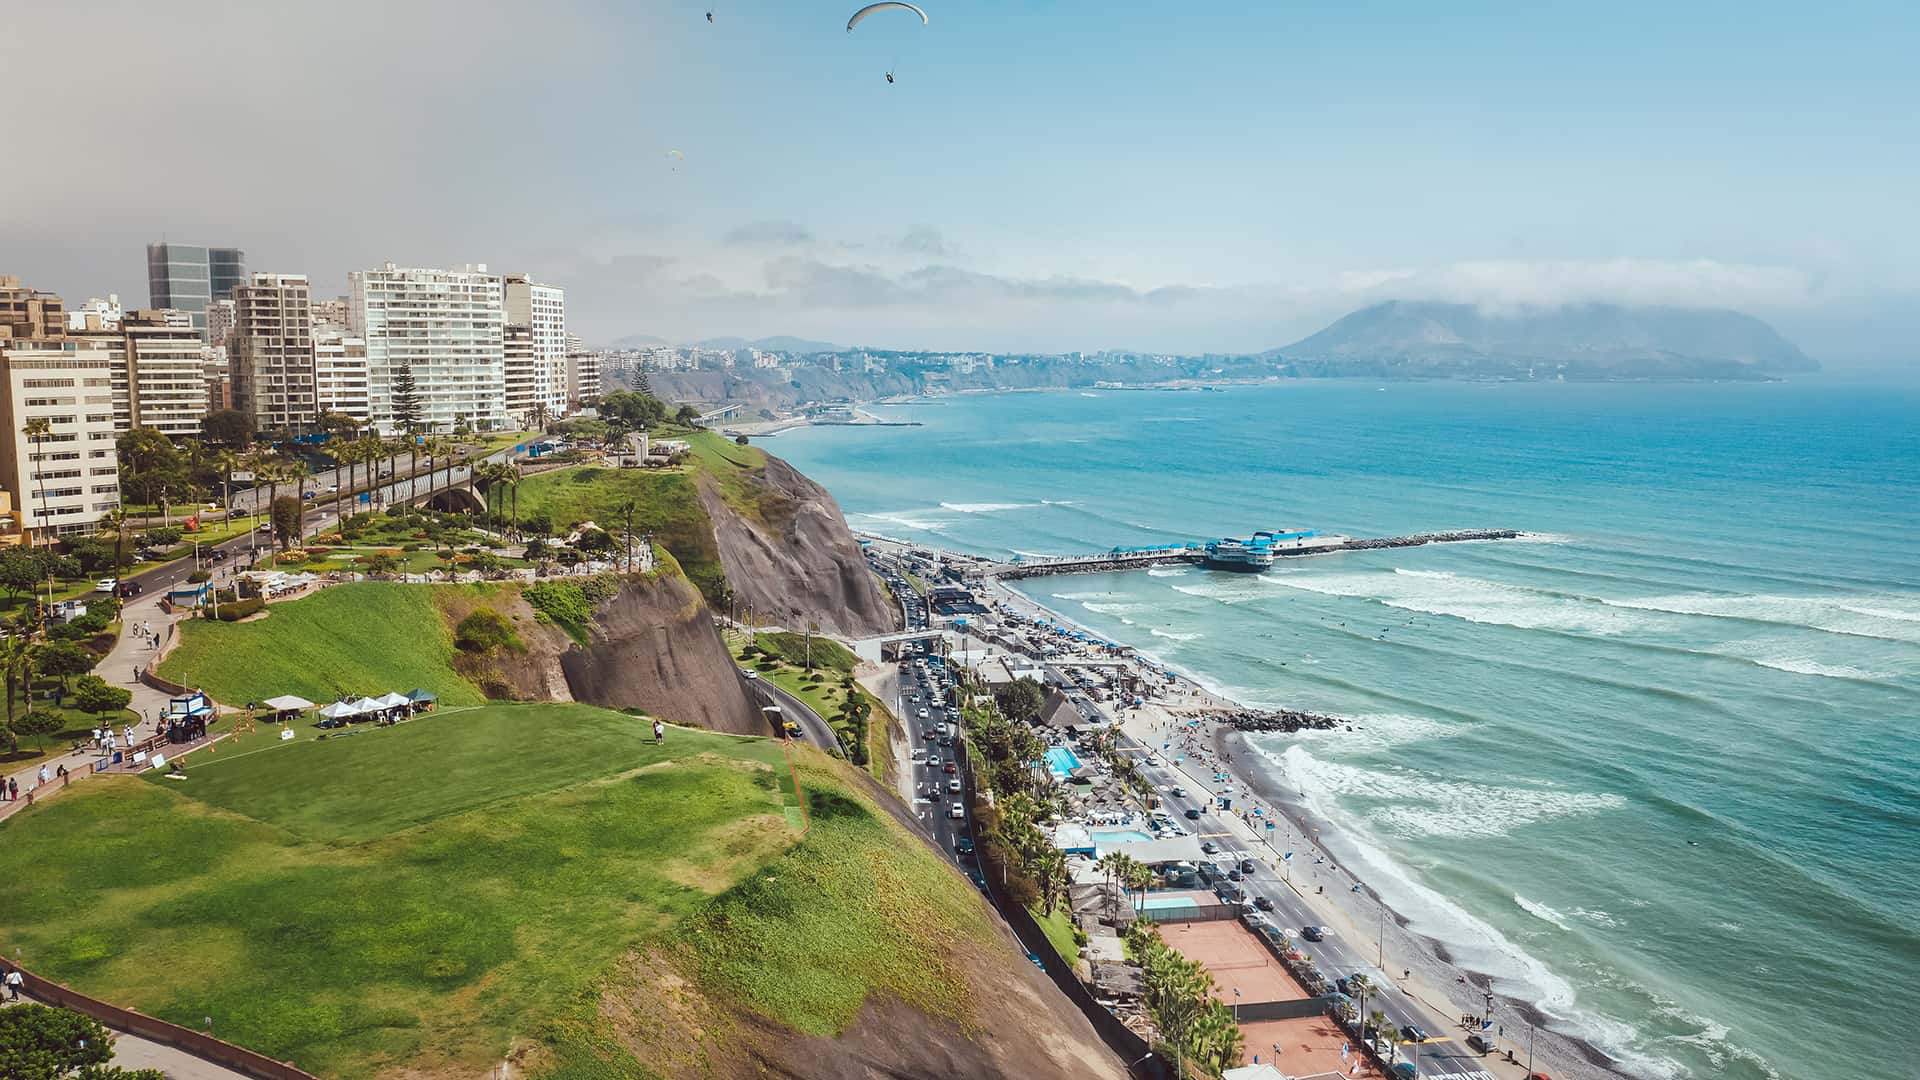 The coast of Miraflores, Lima with sunny weather and some paragliders - RESPONSible Travel Peru